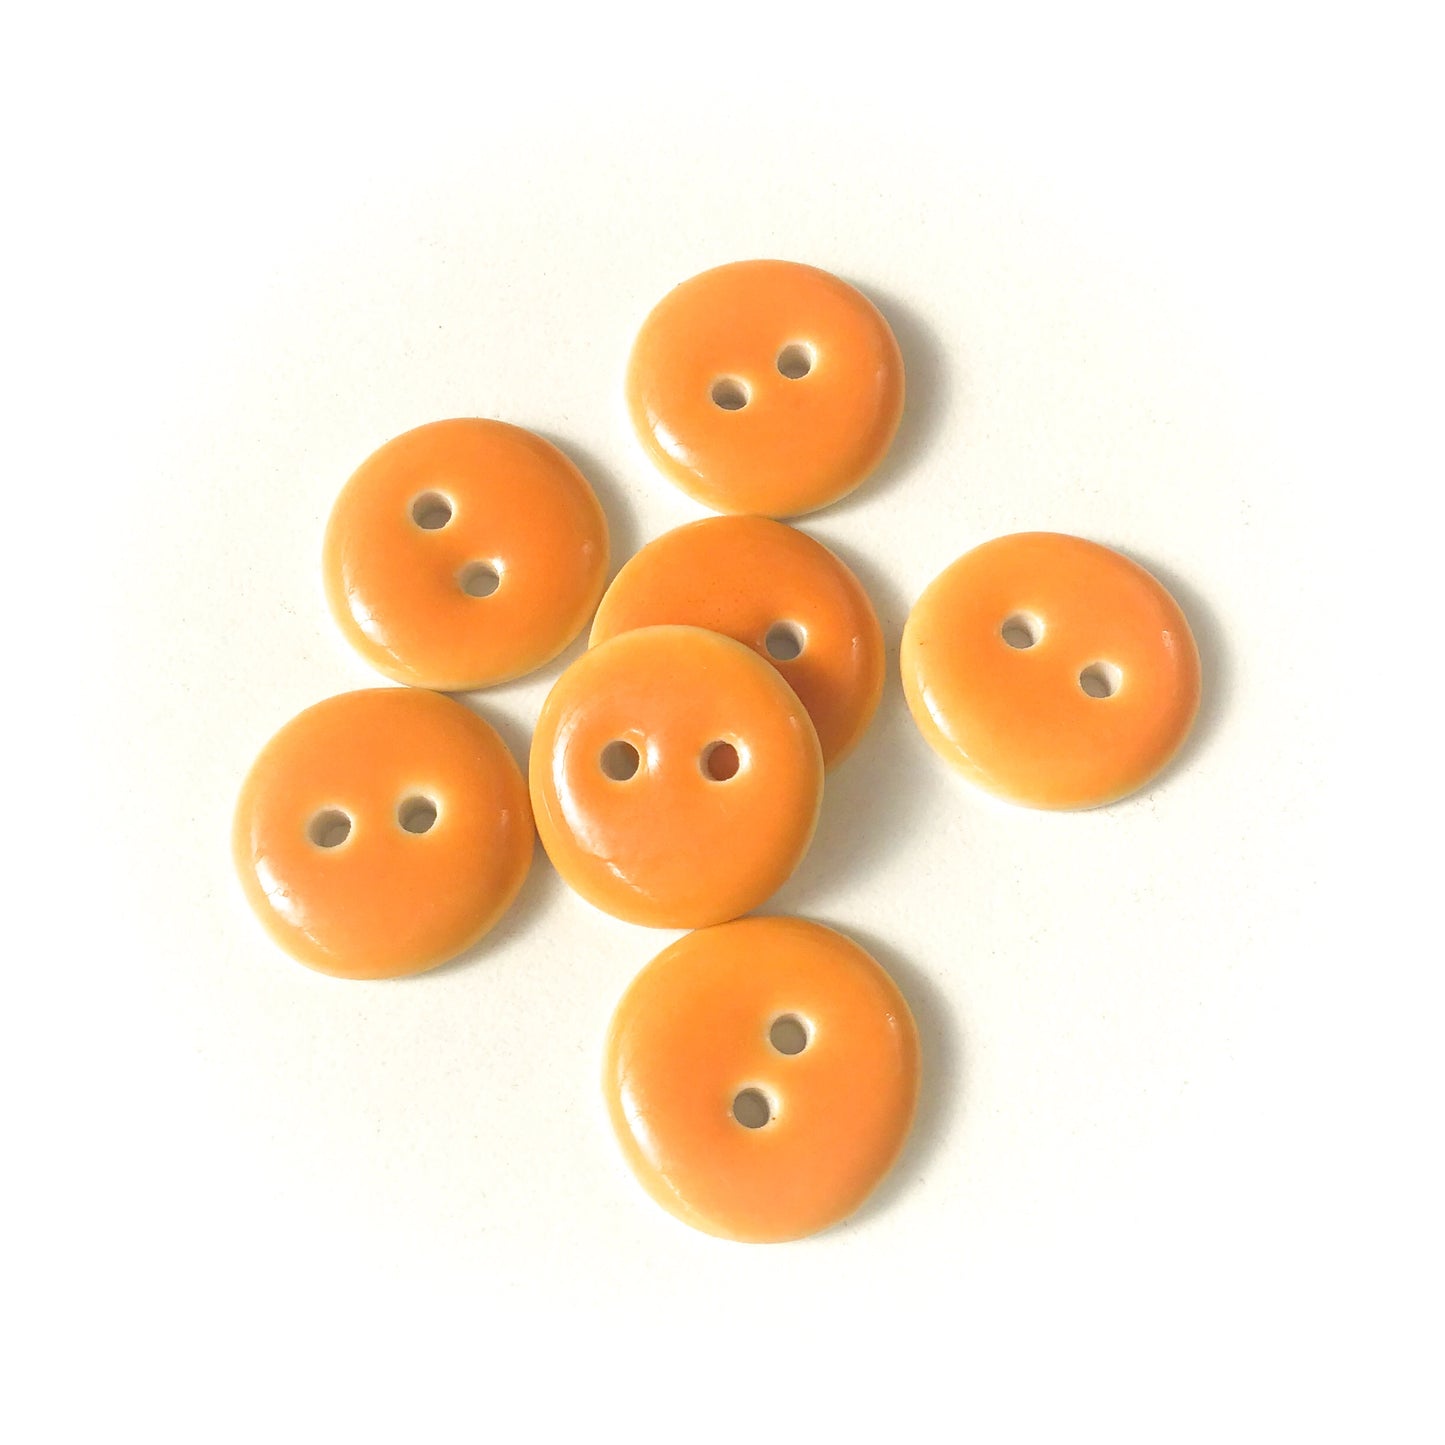 Bright Orange Porcelain Buttons - Orange Clay Buttons - 11/16" - 7 Pack